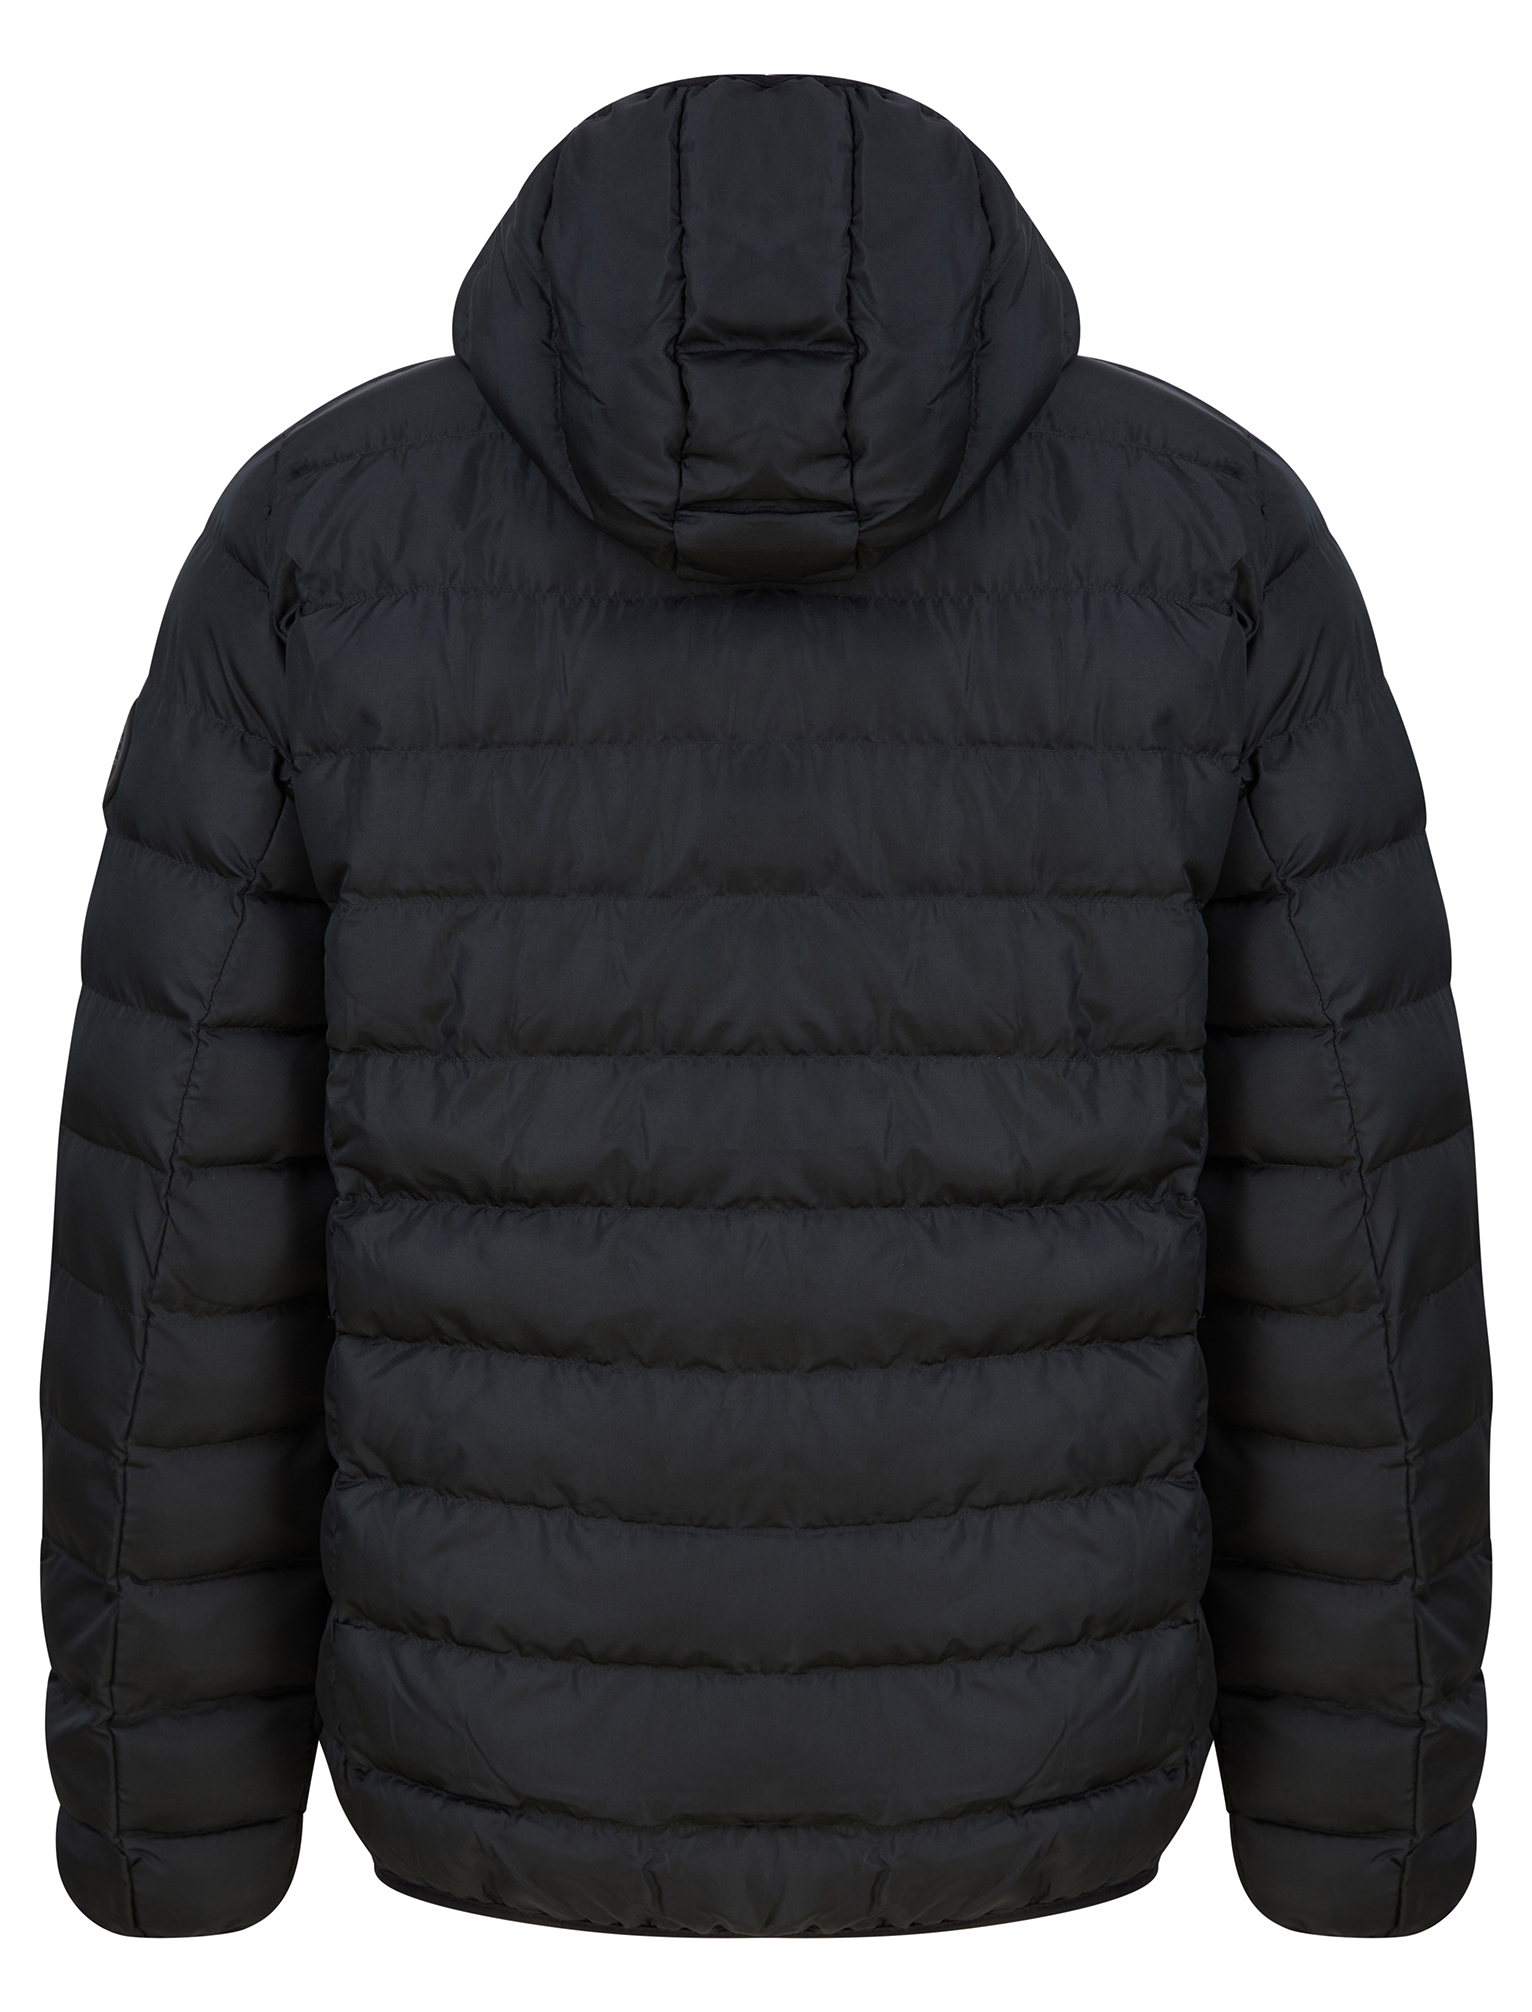 Tokyo Laundry Puffer Jacket Men's Hooded Quilted Padded Warm Winter ...